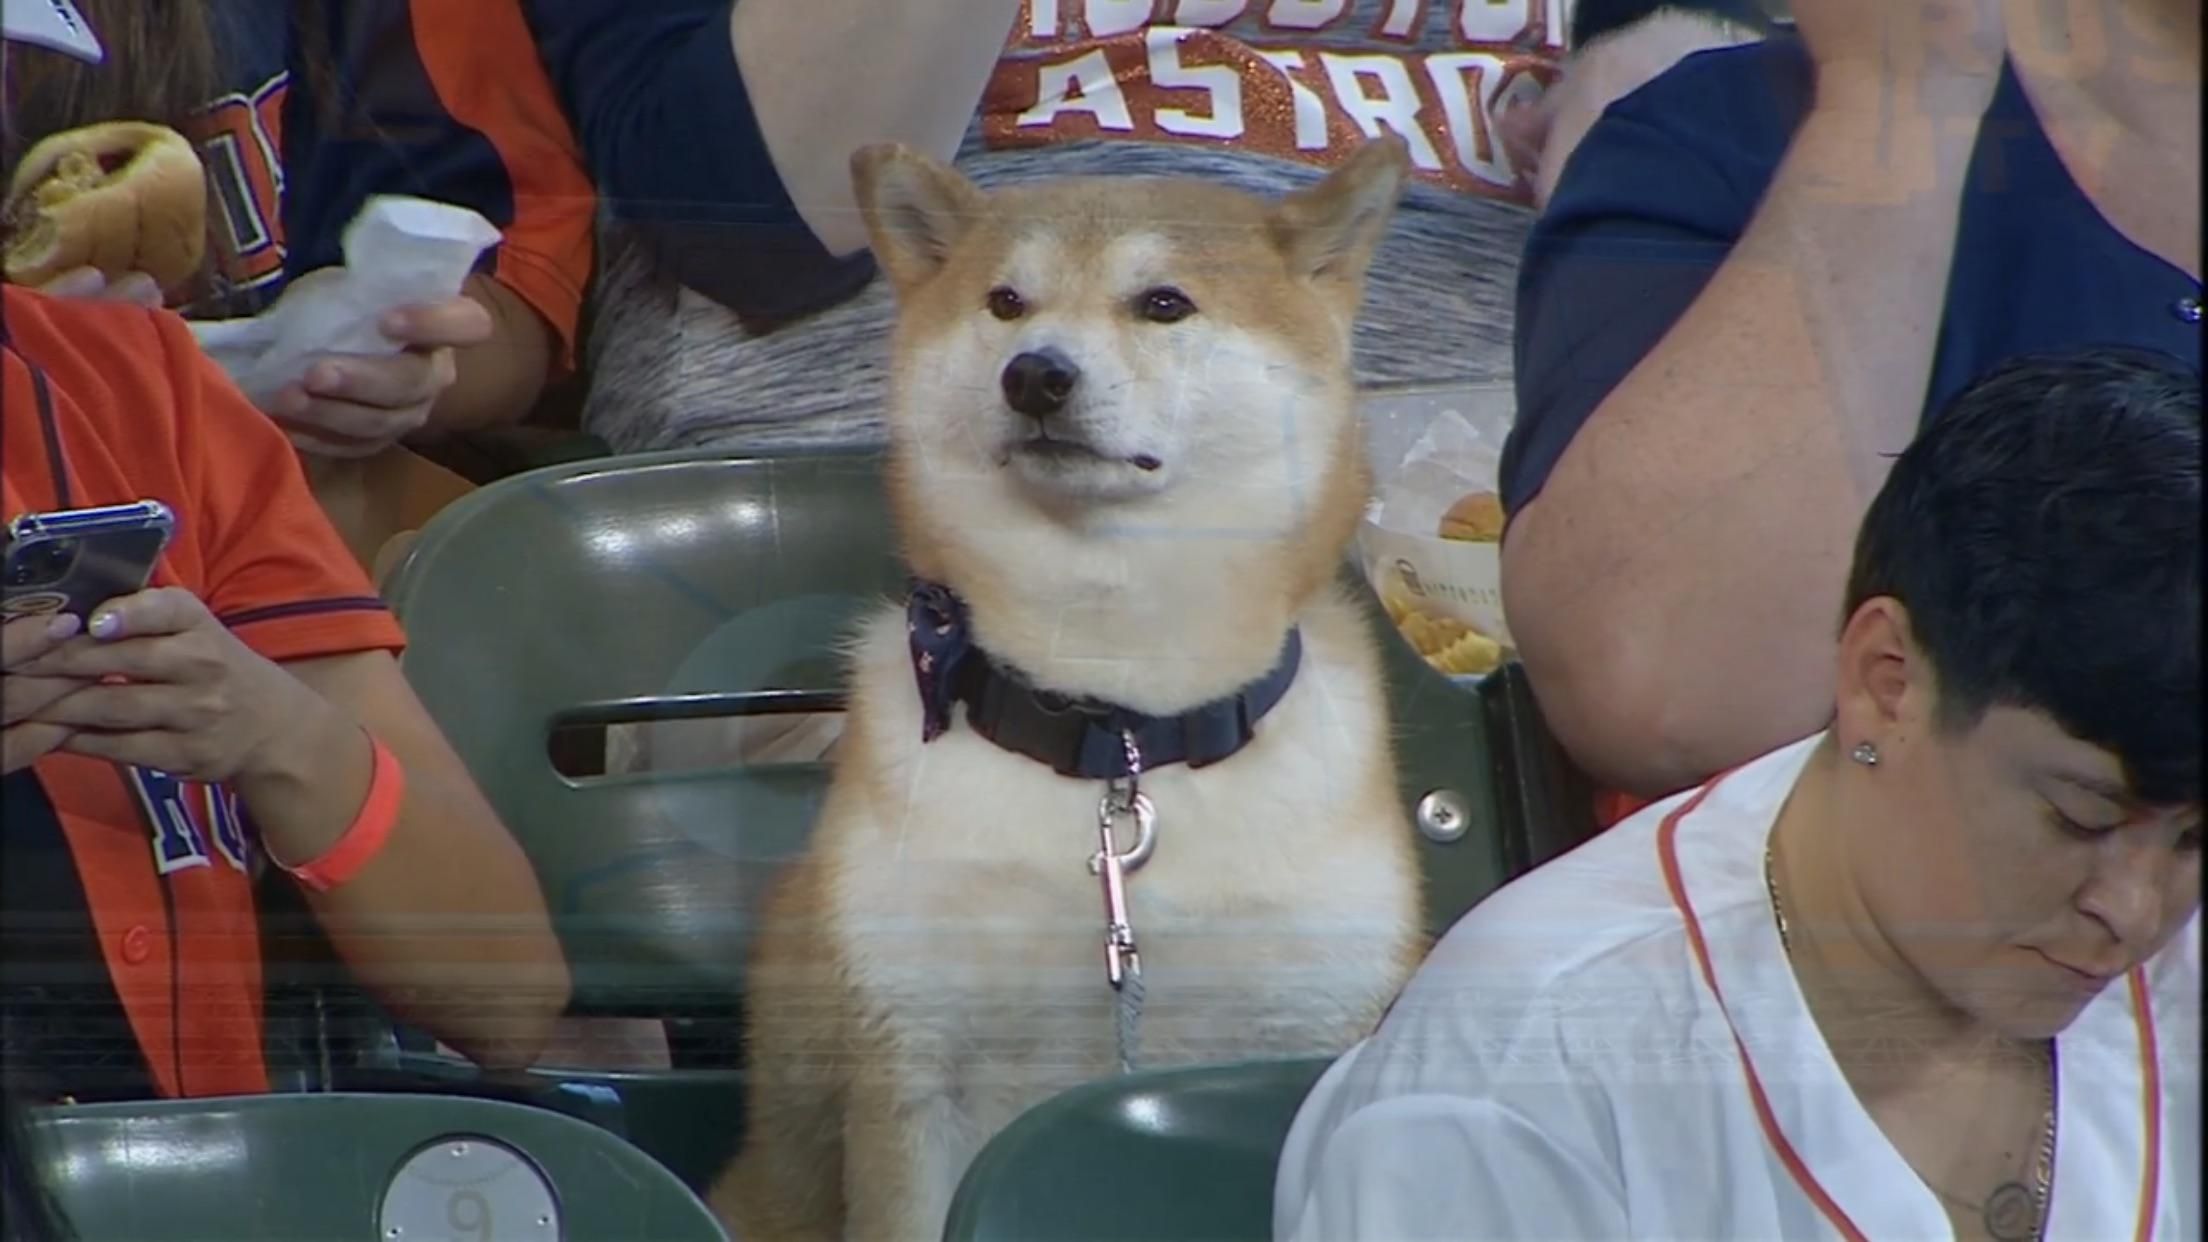 This good boy acts better than 95 percent of people who attend professional sporting events.